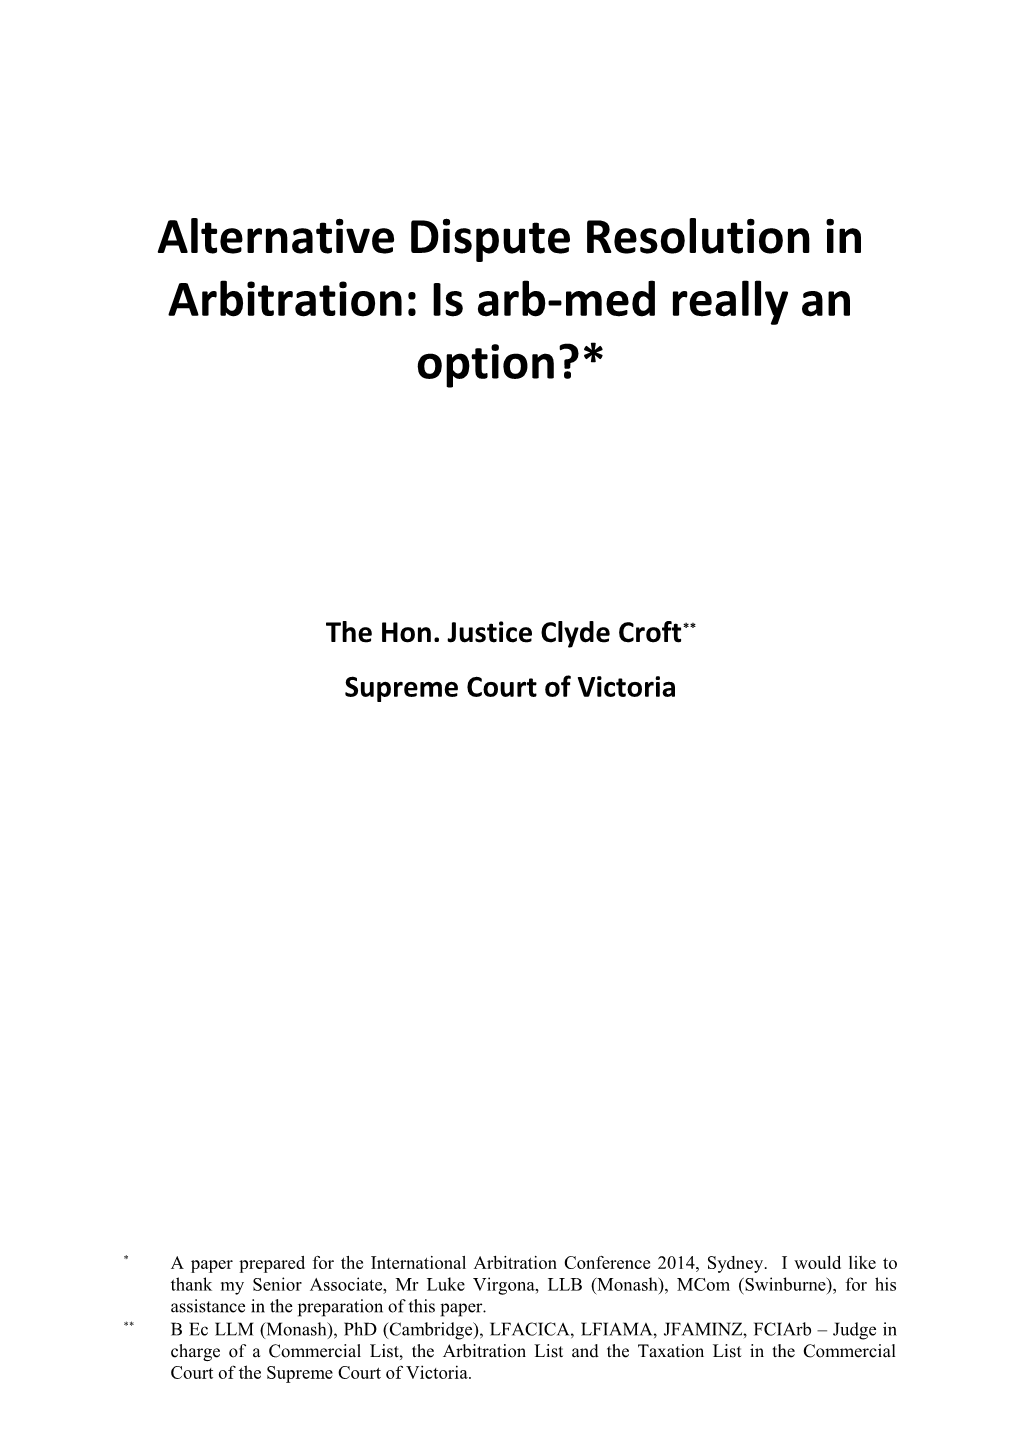 Alternative Dispute Resolution in Arbitration: Is Arb-Med Really an Option?*